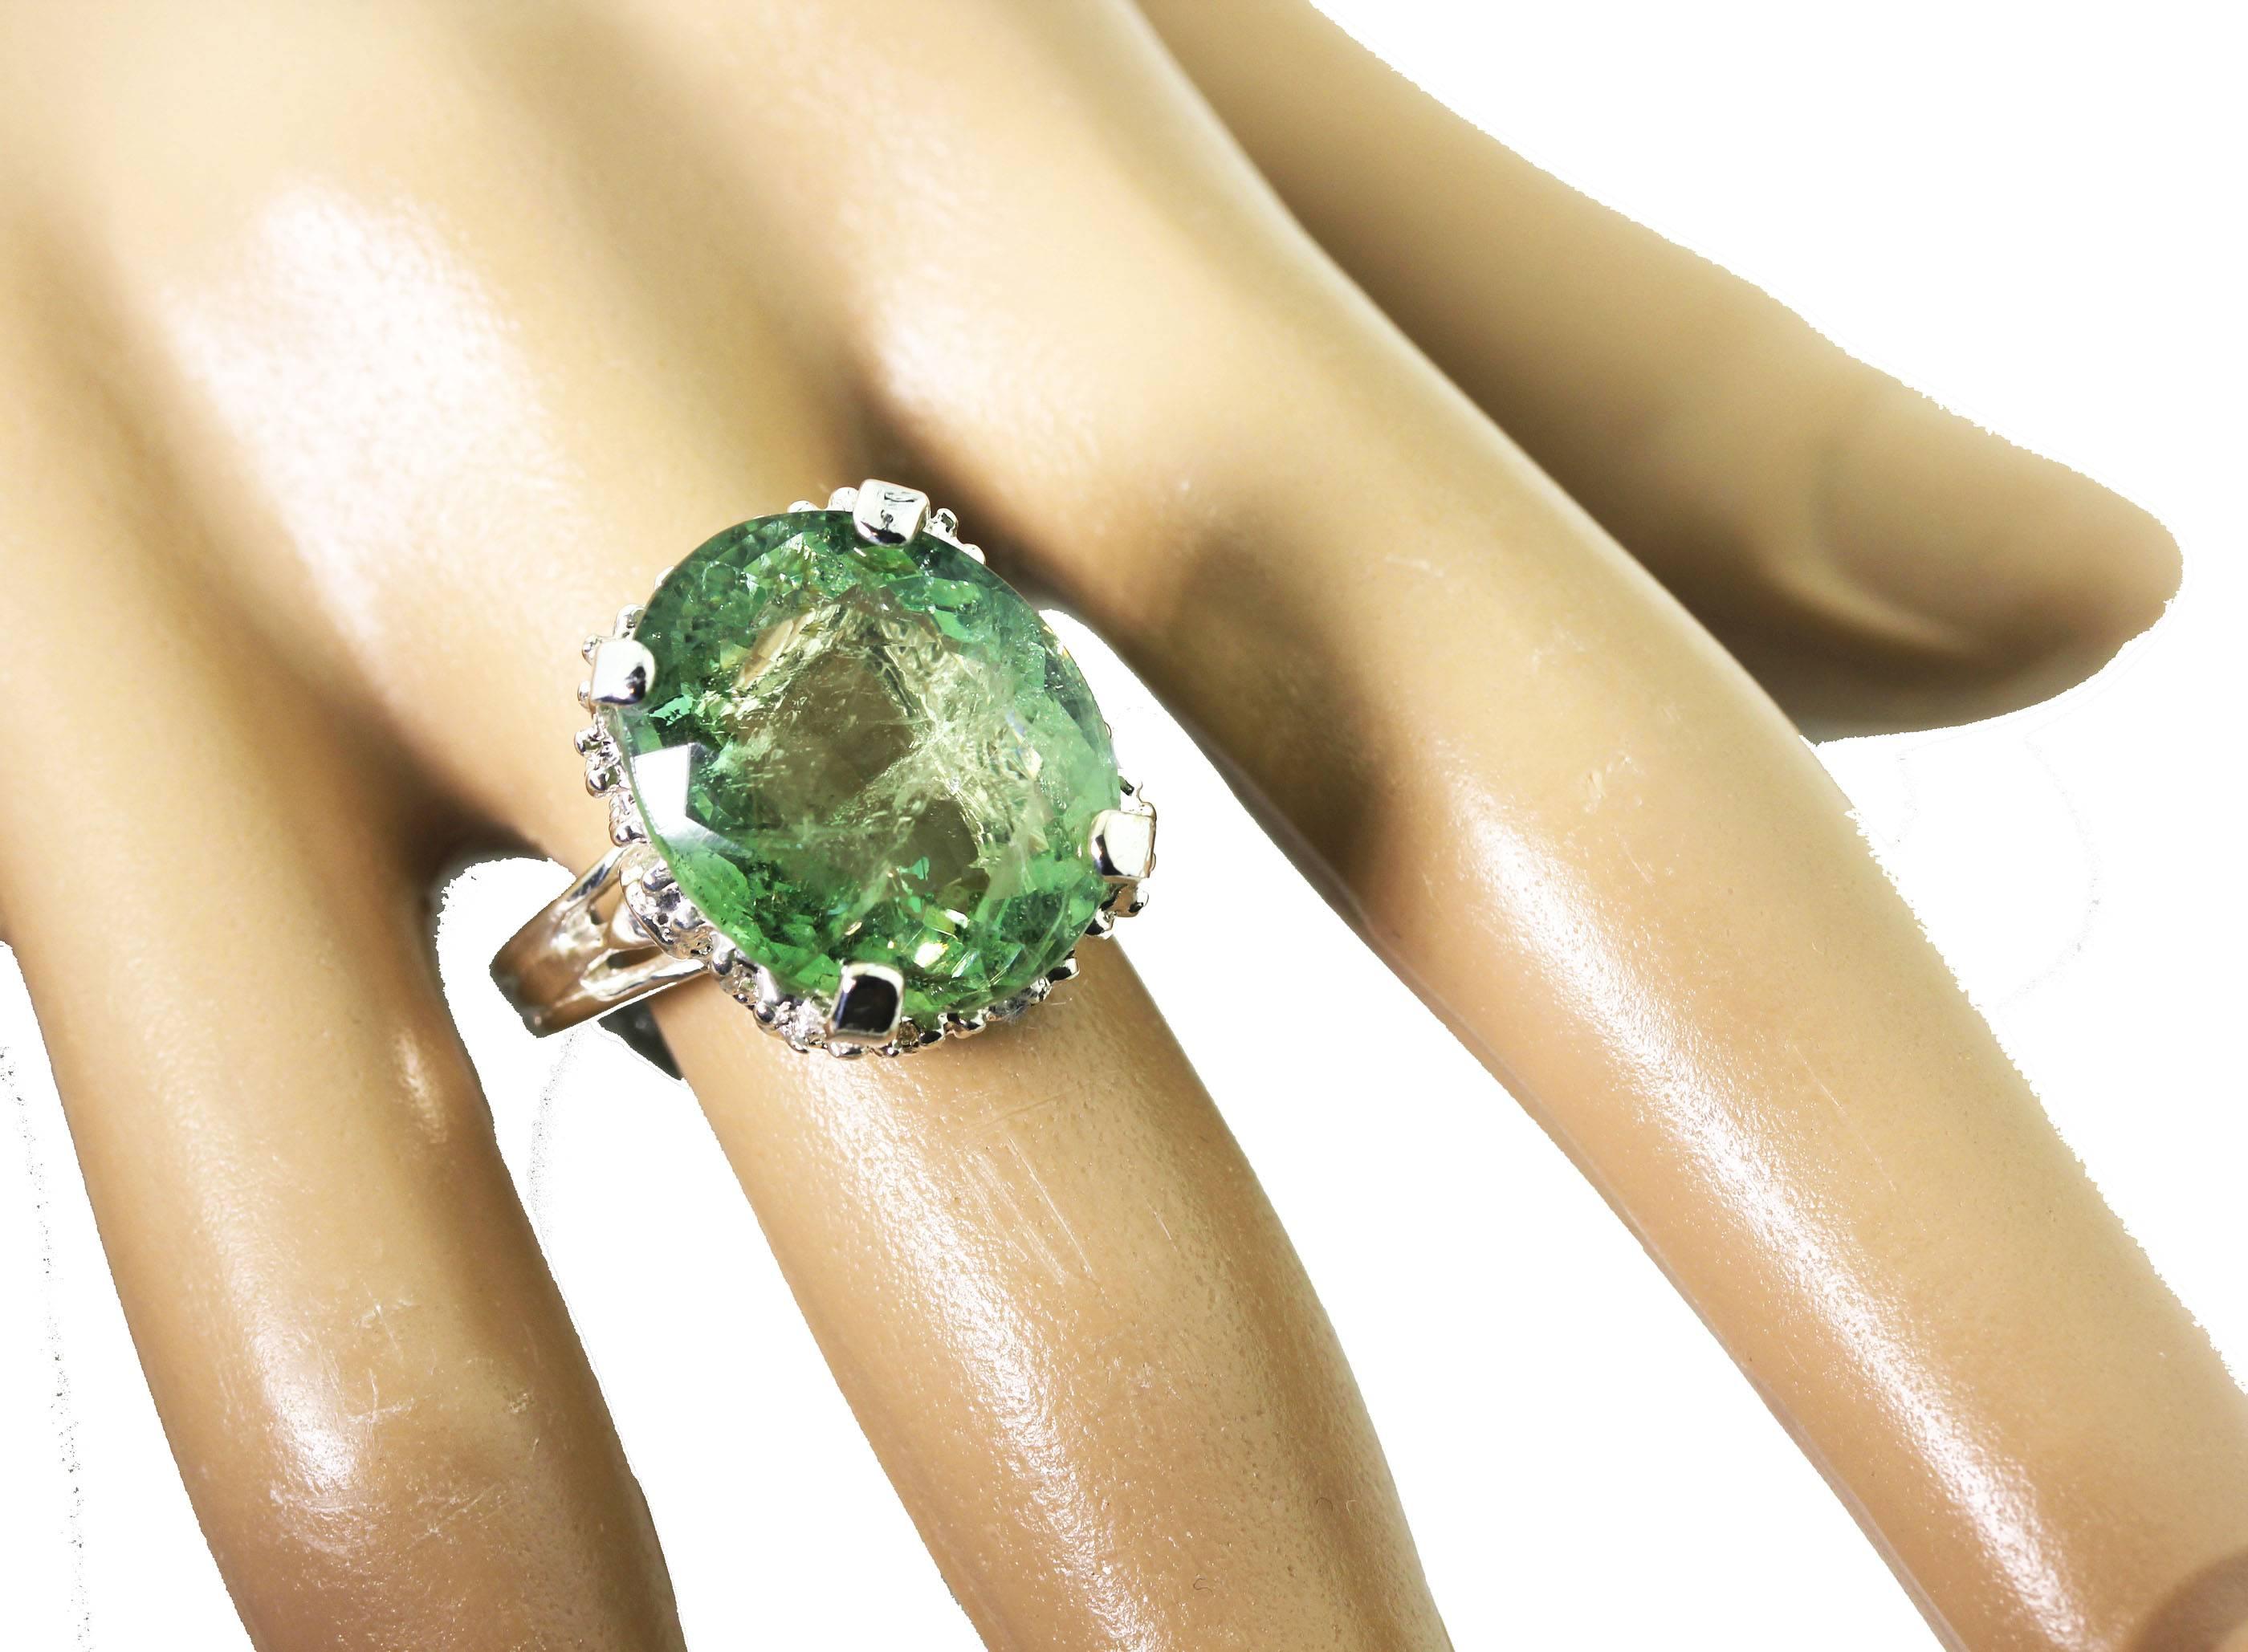 Brilliant Rare 14.98 carat greenish yellowish sparkling Tourmaline (17.2 mm x  14.4 mm) is set in a sterling silver ring size 8.5 (sizable for free). The many teeny tiny natural inclusions make it sparkle more !  This is really gorgeous on you